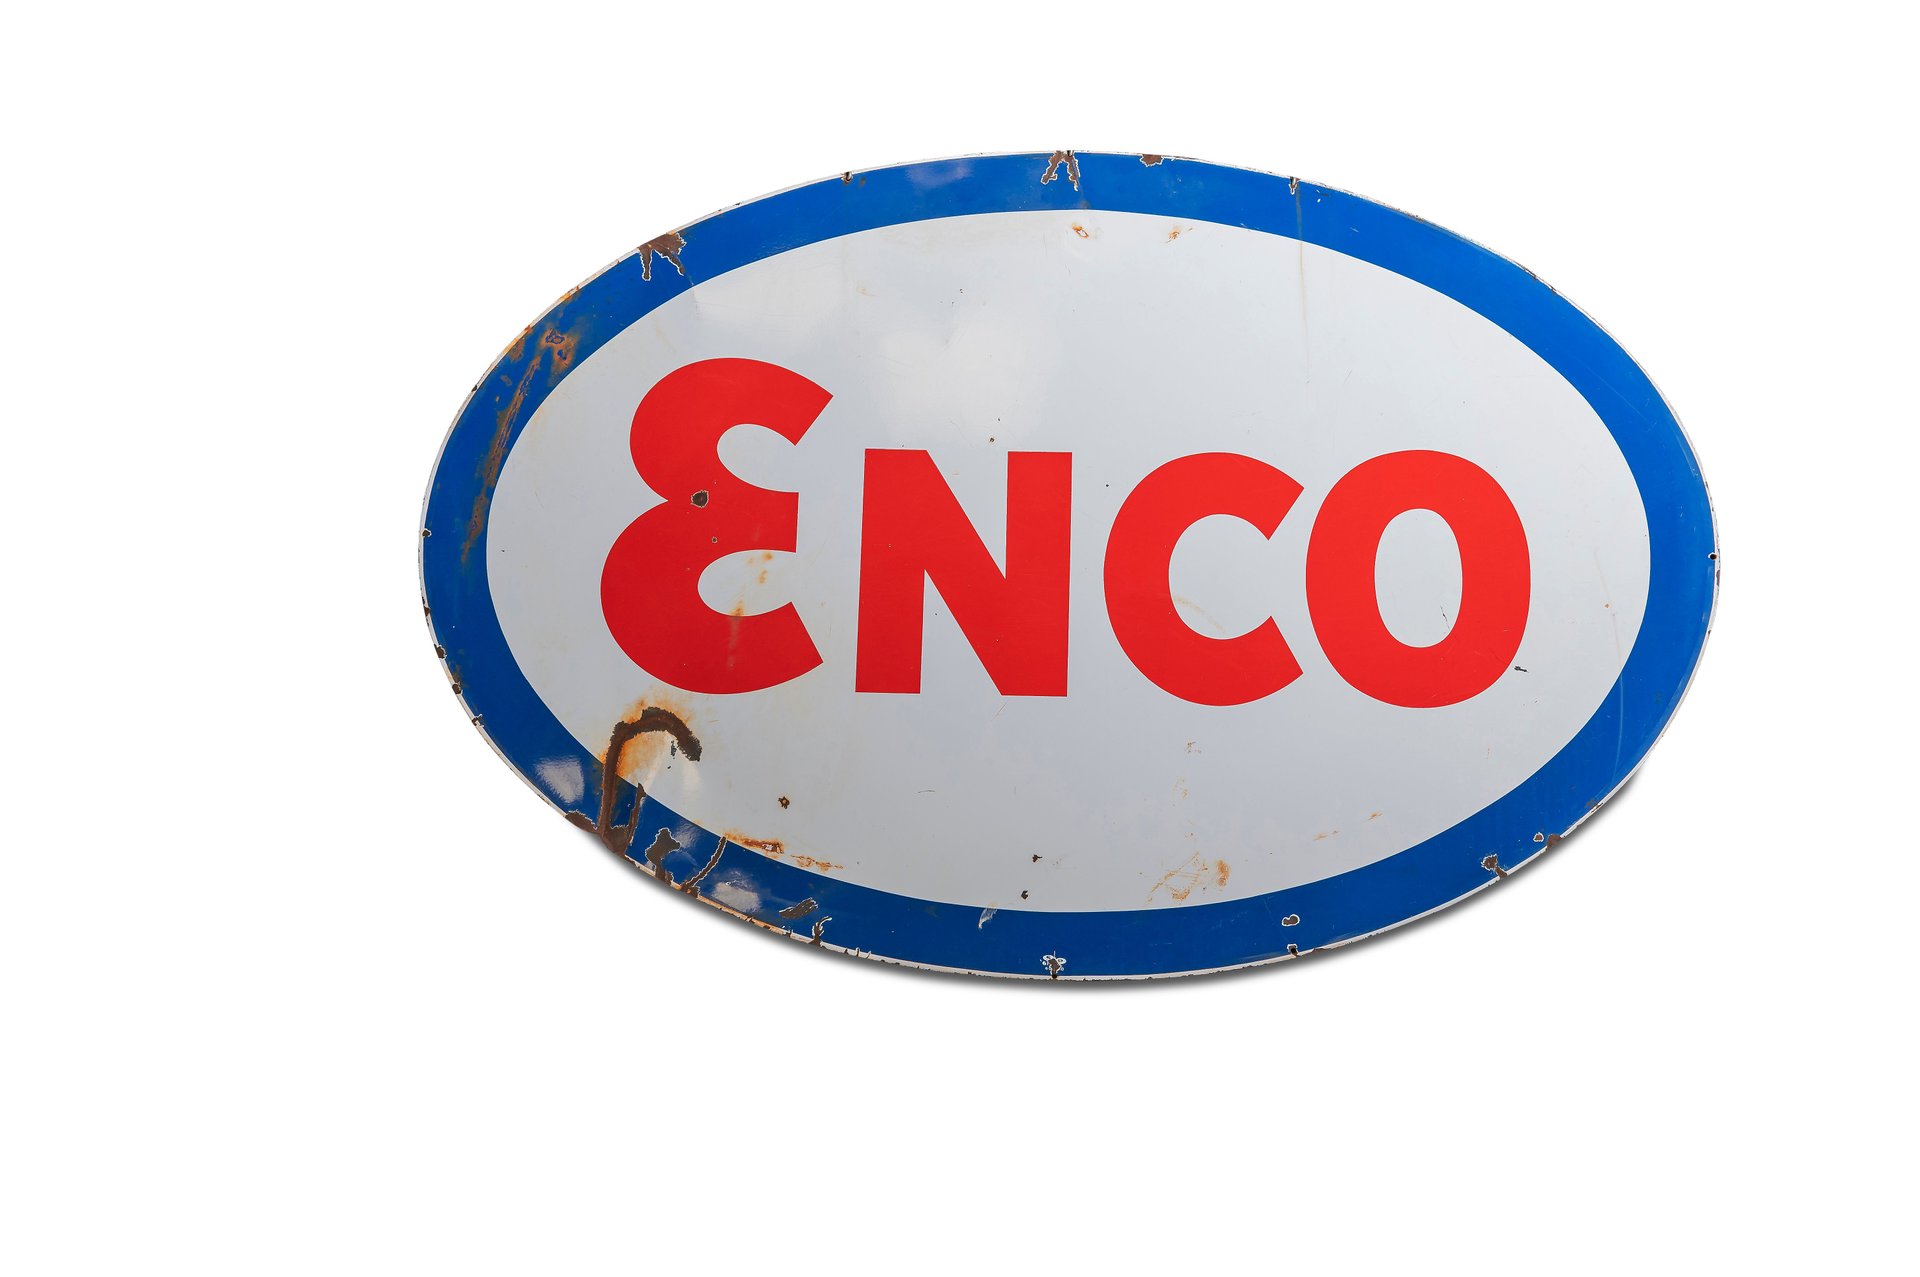 For Sale Large 'Enco' Porcelain Sign, Double-Sided